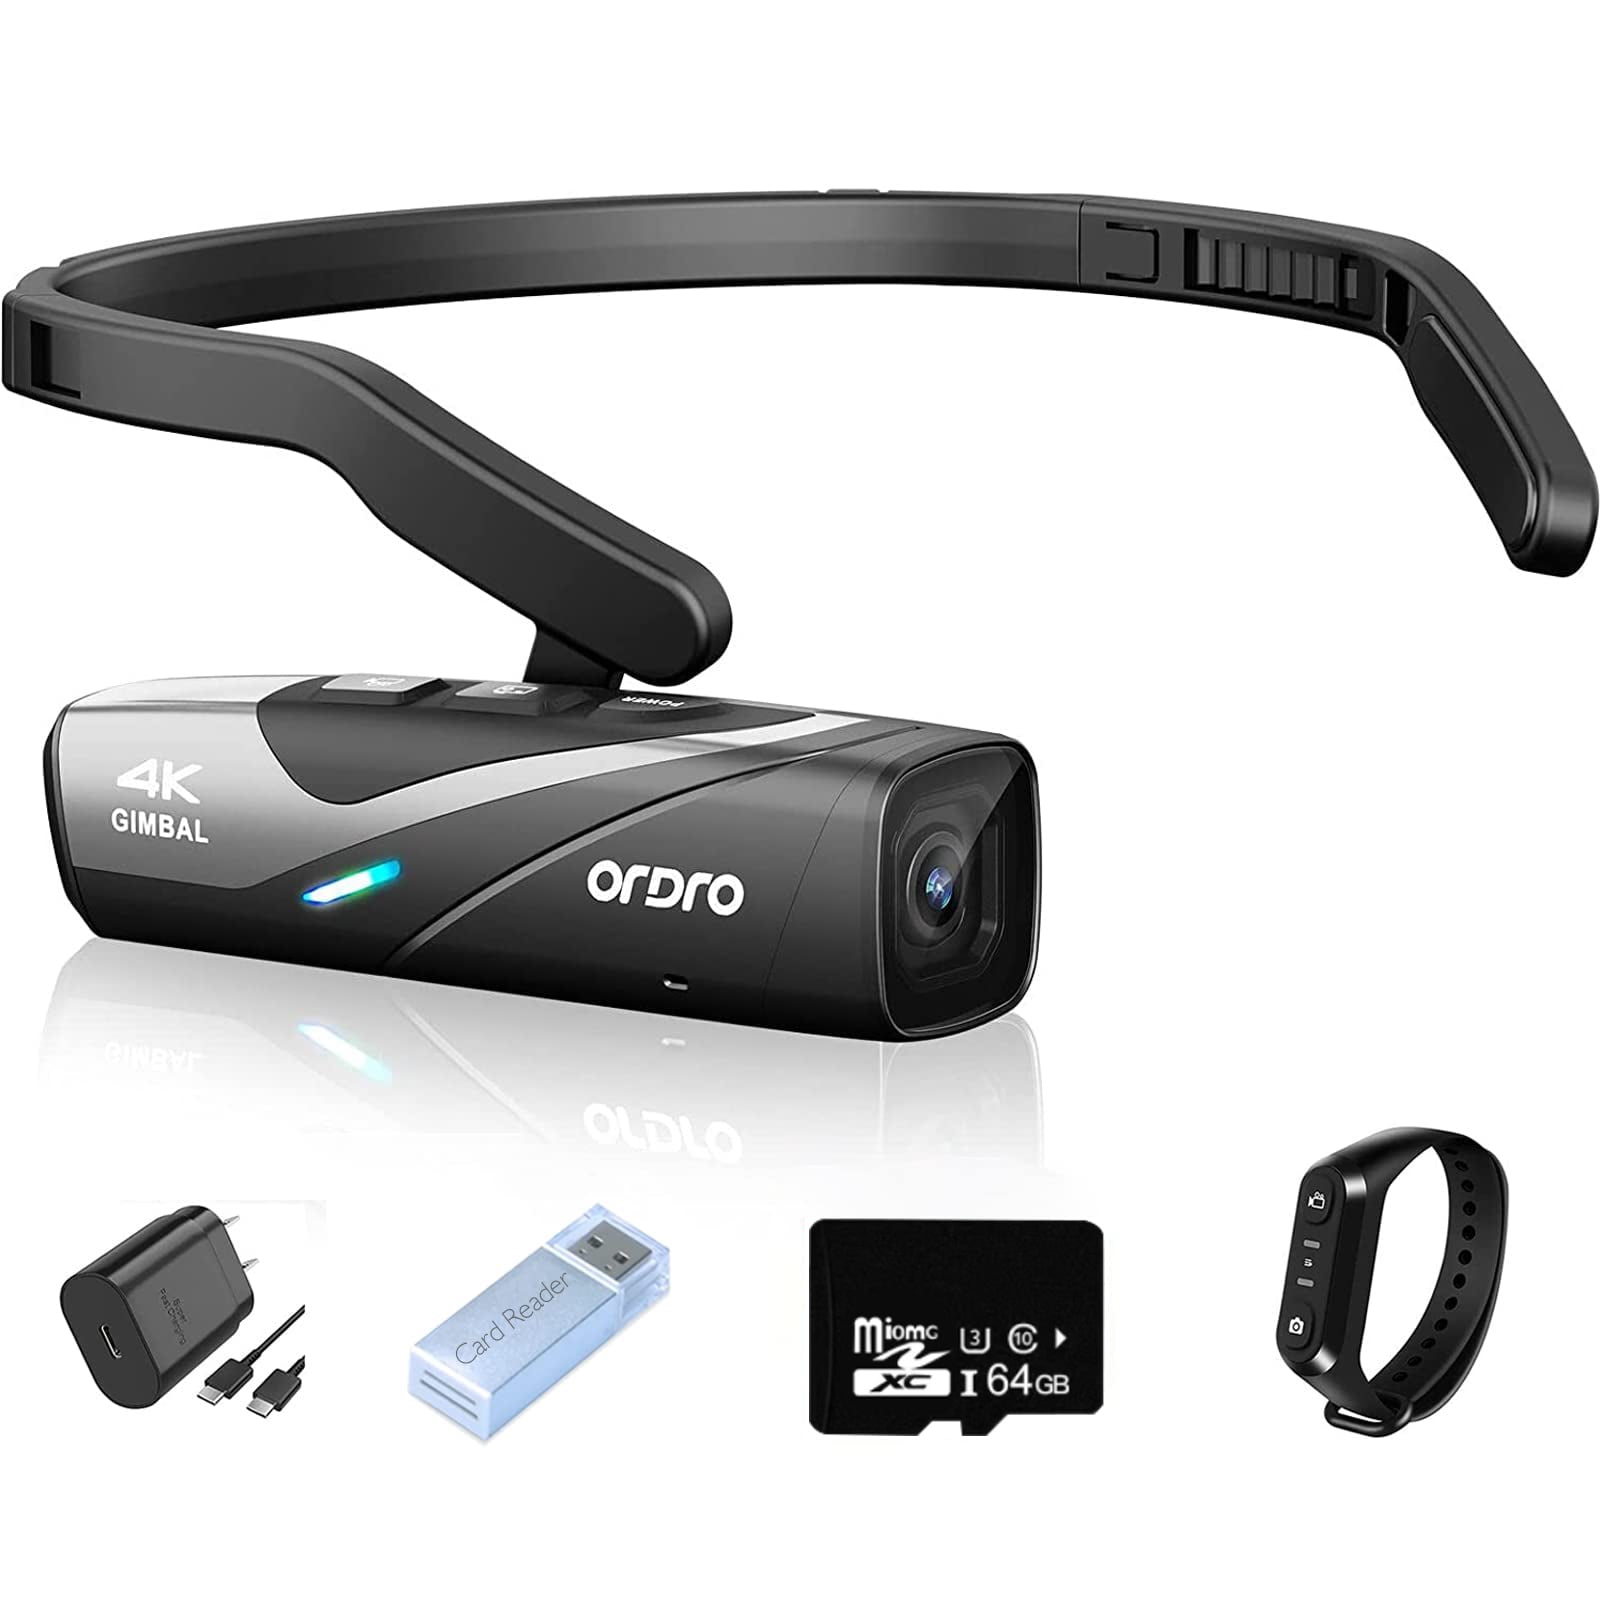 4K Vlog Hands Free Wearable Camera, Head-Mounted Video Camera, Wi-Fi APP Control, Auto Focus, 2-Axis Gimbal Stabilizer with Remote Control, Fast Charger, 64GB Micro SD Card - Walmart.com